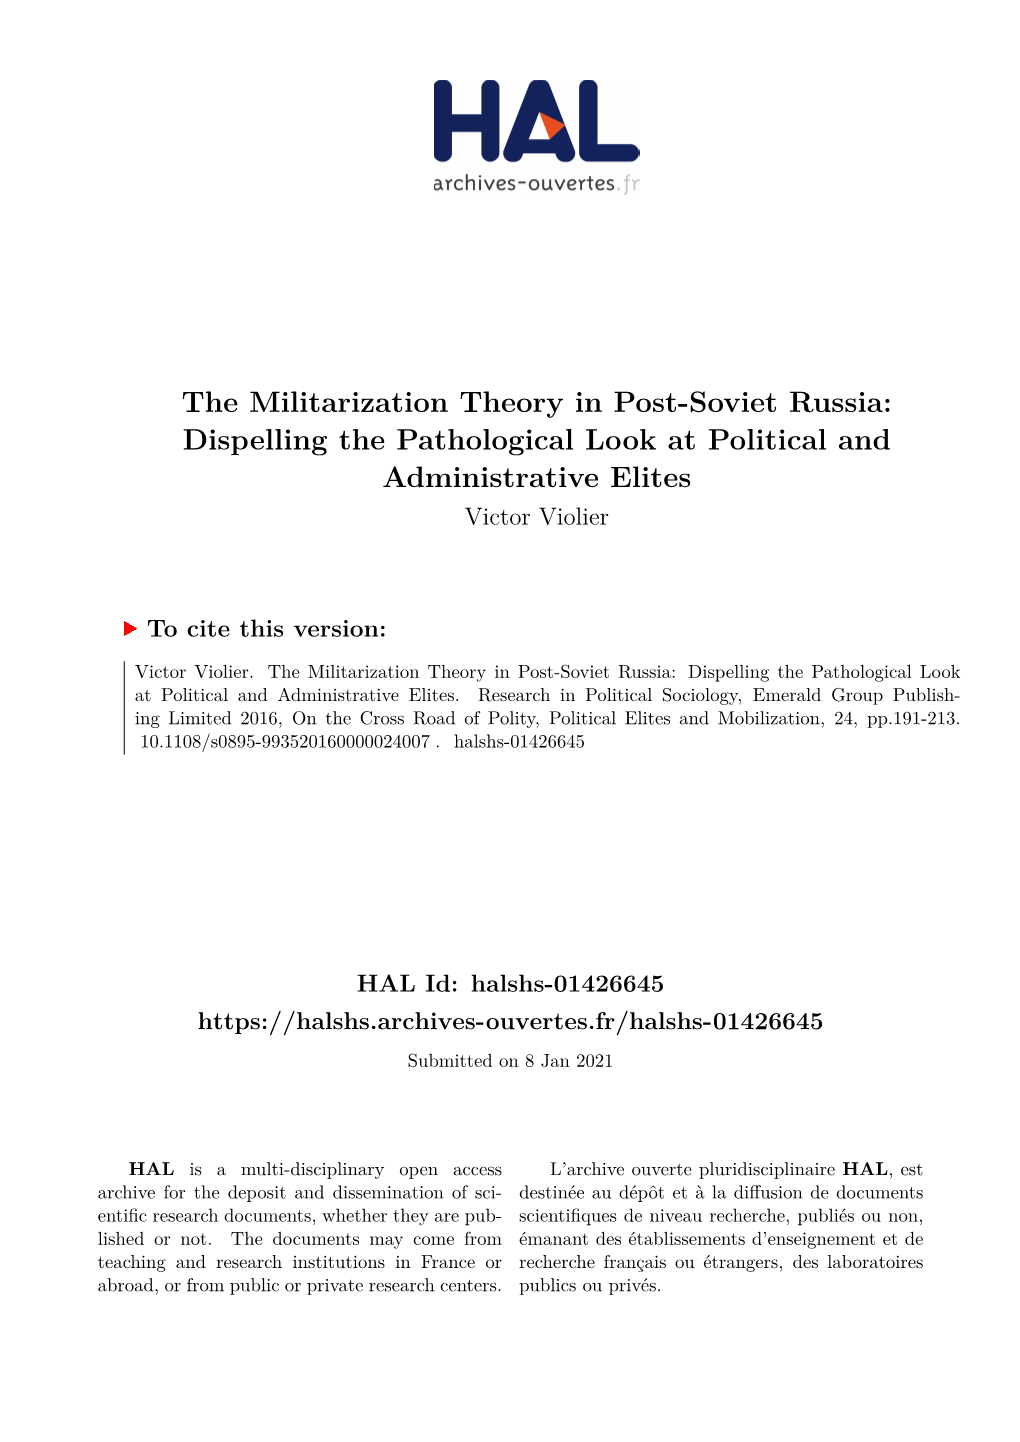 The Militarization Theory in Post-Soviet Russia: Dispelling the Pathological Look at Political and Administrative Elites Victor Violier